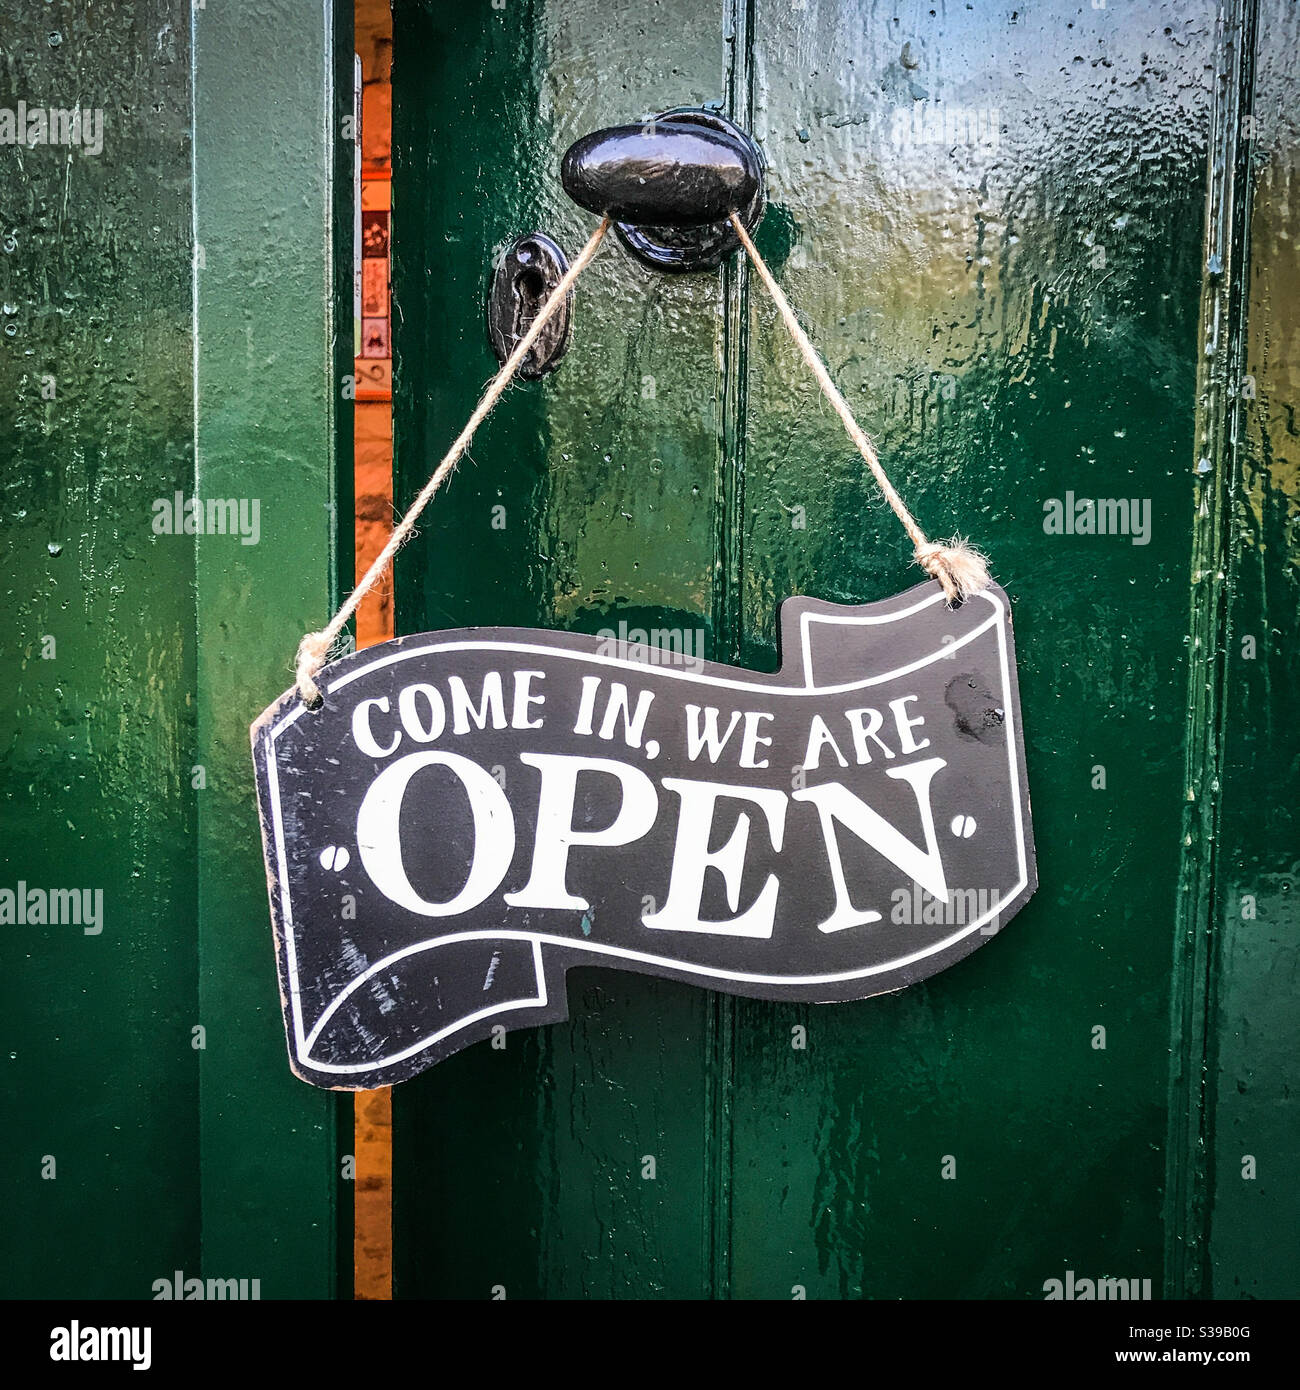 Come In We Are Open sign Stock Photo